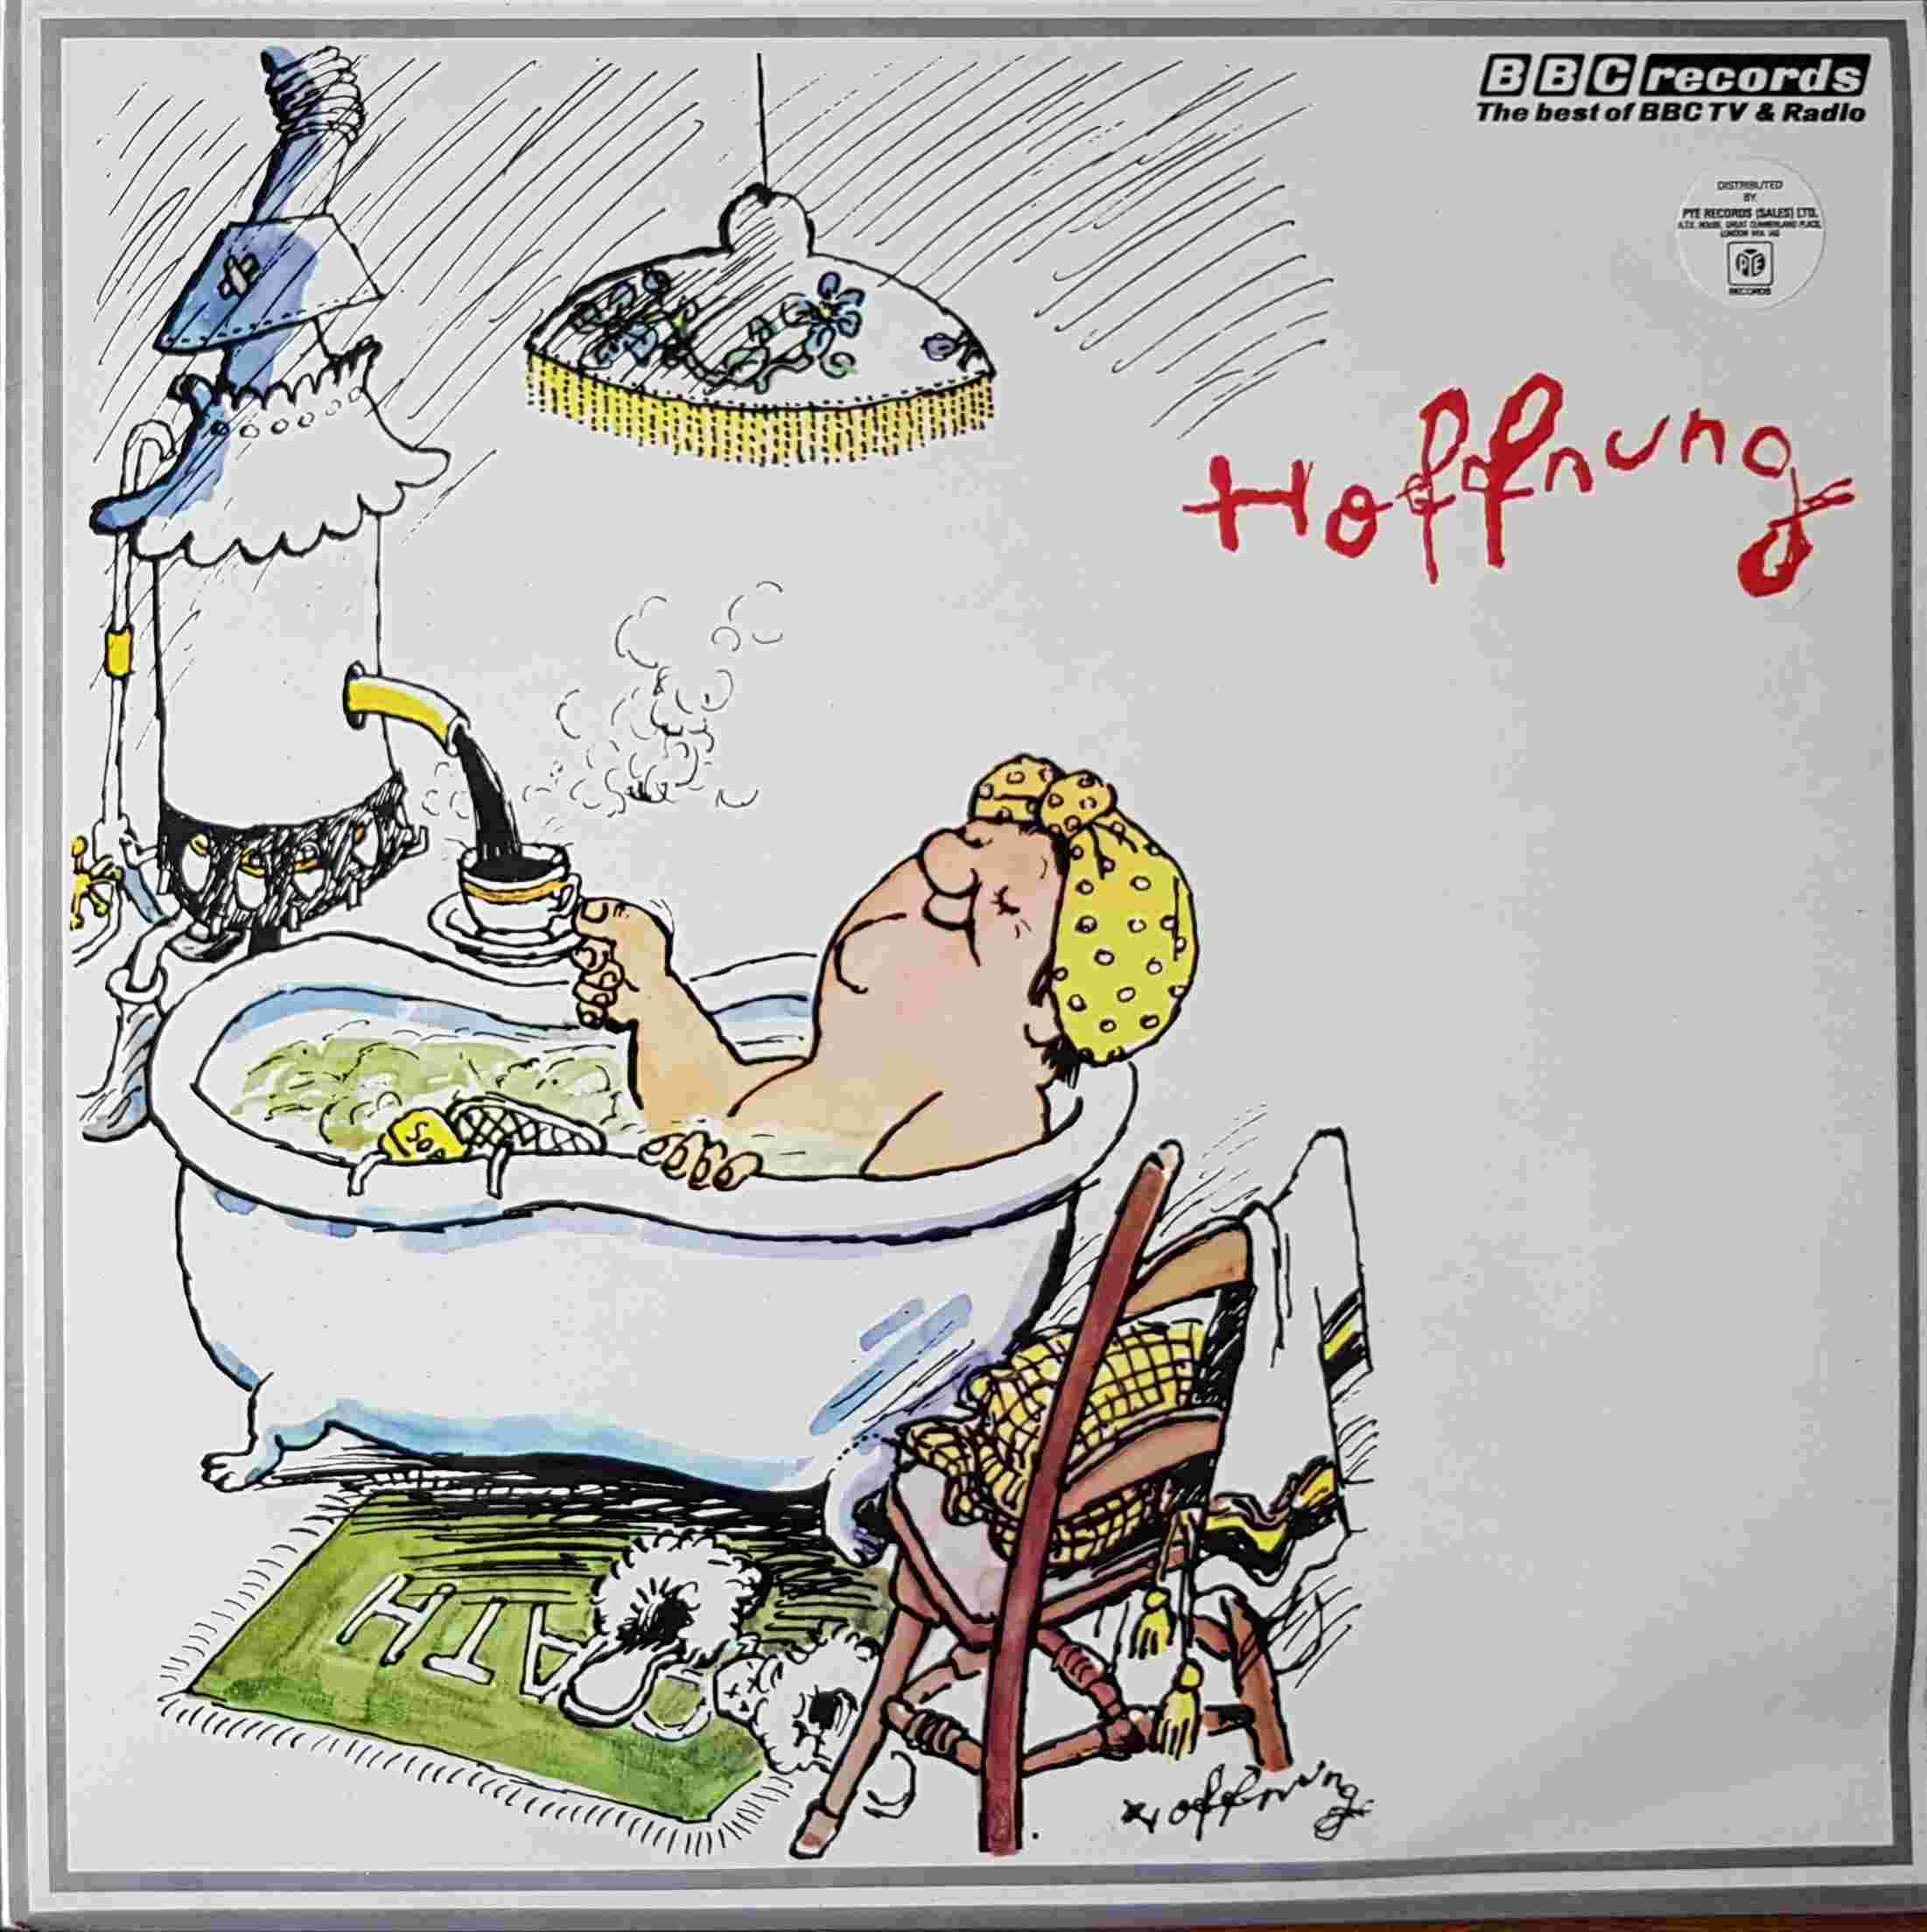 Picture of REF 157 Hoffnung by artist Hoffnung from the BBC albums - Records and Tapes library